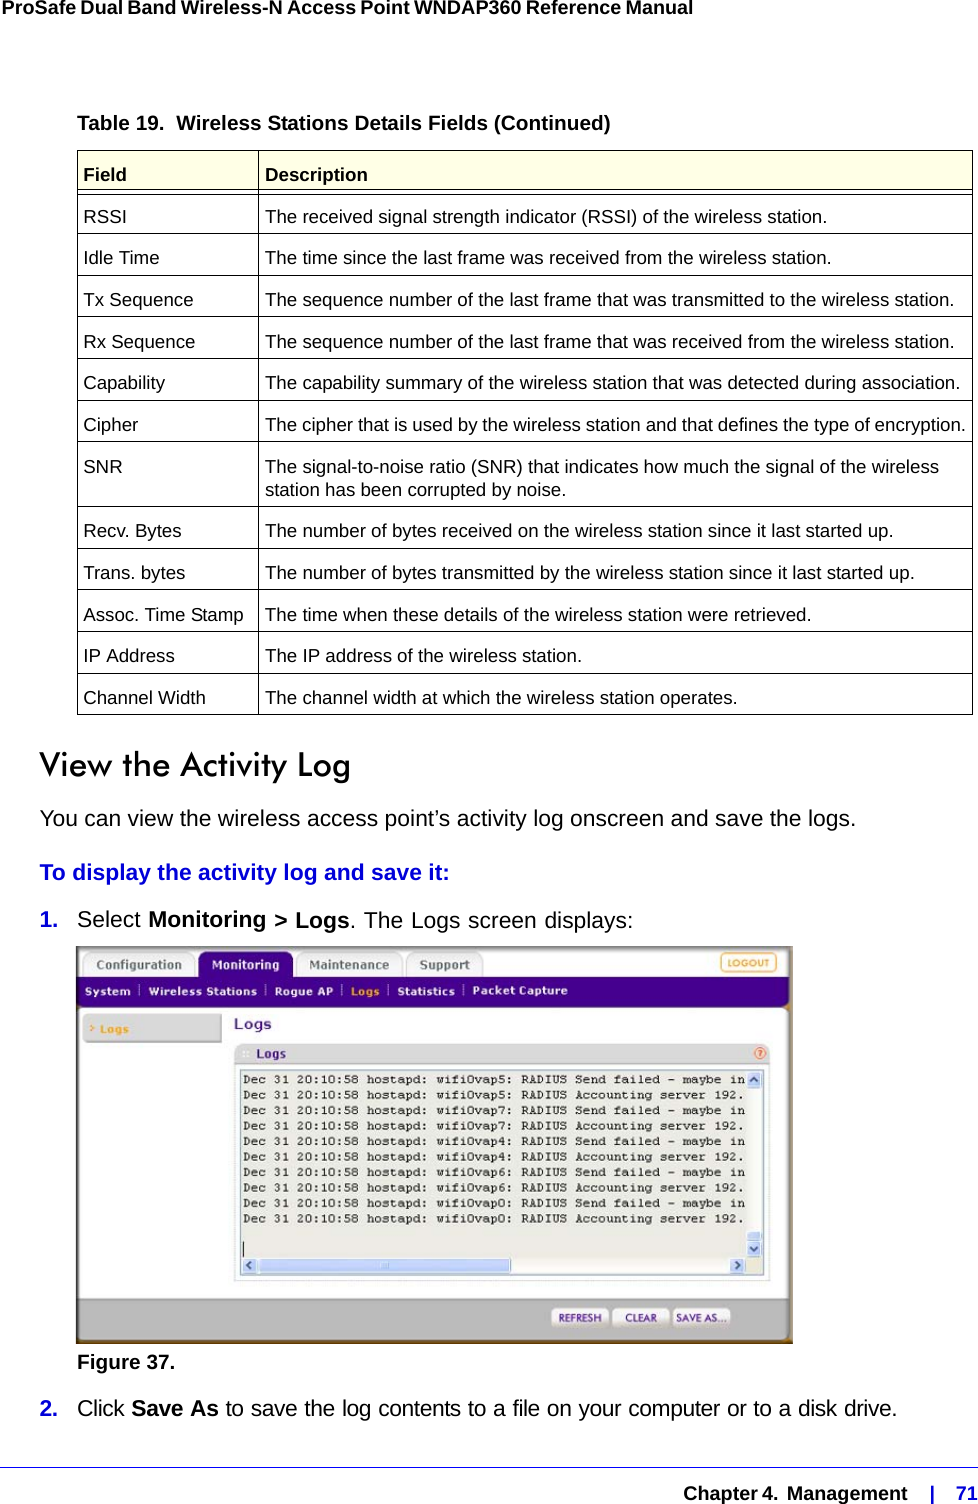   Chapter 4.  Management    |    71ProSafe Dual Band Wireless-N Access Point WNDAP360 Reference Manual View the Activity LogYou can view the wireless access point’s activity log onscreen and save the logs.To display the activity log and save it:1.  Select Monitoring &gt; Logs. The Logs screen displays:Figure 37.  2.  Click Save As to save the log contents to a file on your computer or to a disk drive.RSSI The received signal strength indicator (RSSI) of the wireless station.Idle Time The time since the last frame was received from the wireless station.Tx Sequence The sequence number of the last frame that was transmitted to the wireless station.Rx Sequence The sequence number of the last frame that was received from the wireless station.Capability The capability summary of the wireless station that was detected during association.Cipher The cipher that is used by the wireless station and that defines the type of encryption.SNR The signal-to-noise ratio (SNR) that indicates how much the signal of the wireless station has been corrupted by noise.Recv. Bytes The number of bytes received on the wireless station since it last started up.Trans. bytes The number of bytes transmitted by the wireless station since it last started up.Assoc. Time Stamp The time when these details of the wireless station were retrieved.IP Address The IP address of the wireless station.Channel Width The channel width at which the wireless station operates.Table 19.  Wireless Stations Details Fields (Continued)Field  Description